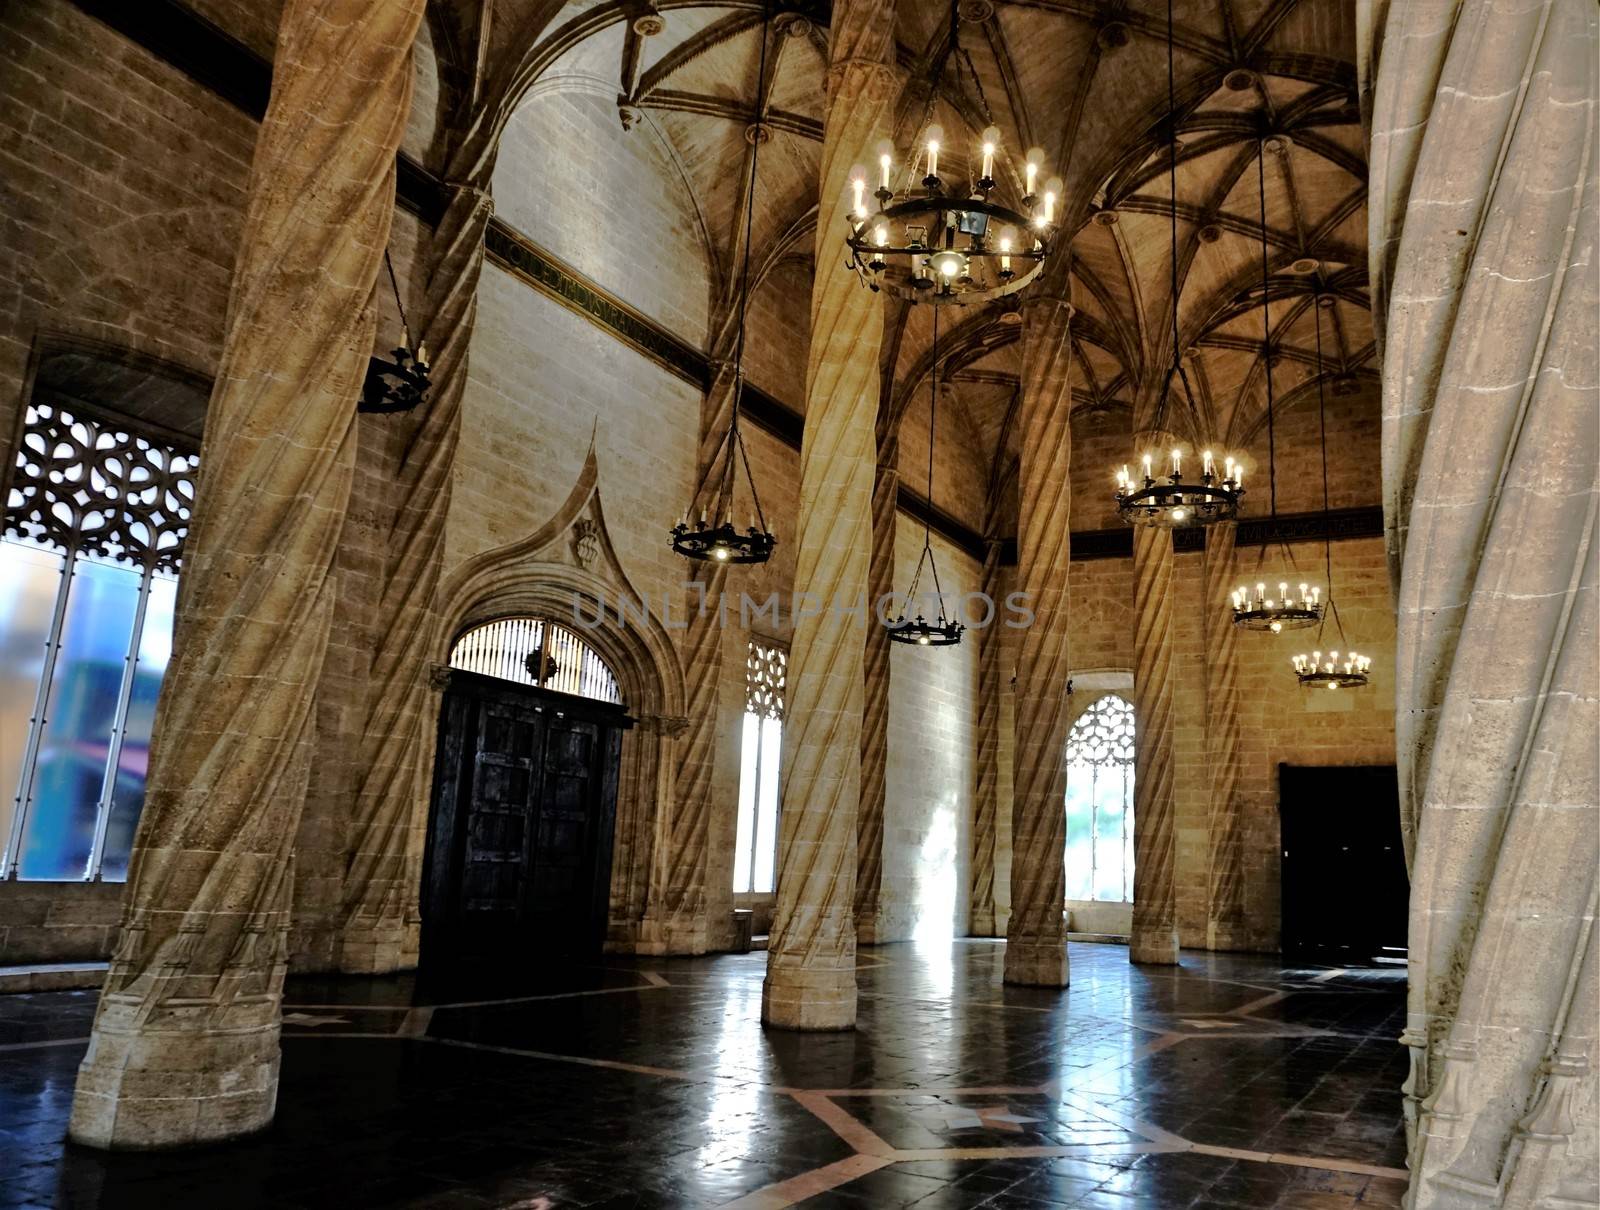 Photo of Valencia silk excahnge interior hall by pisces2386